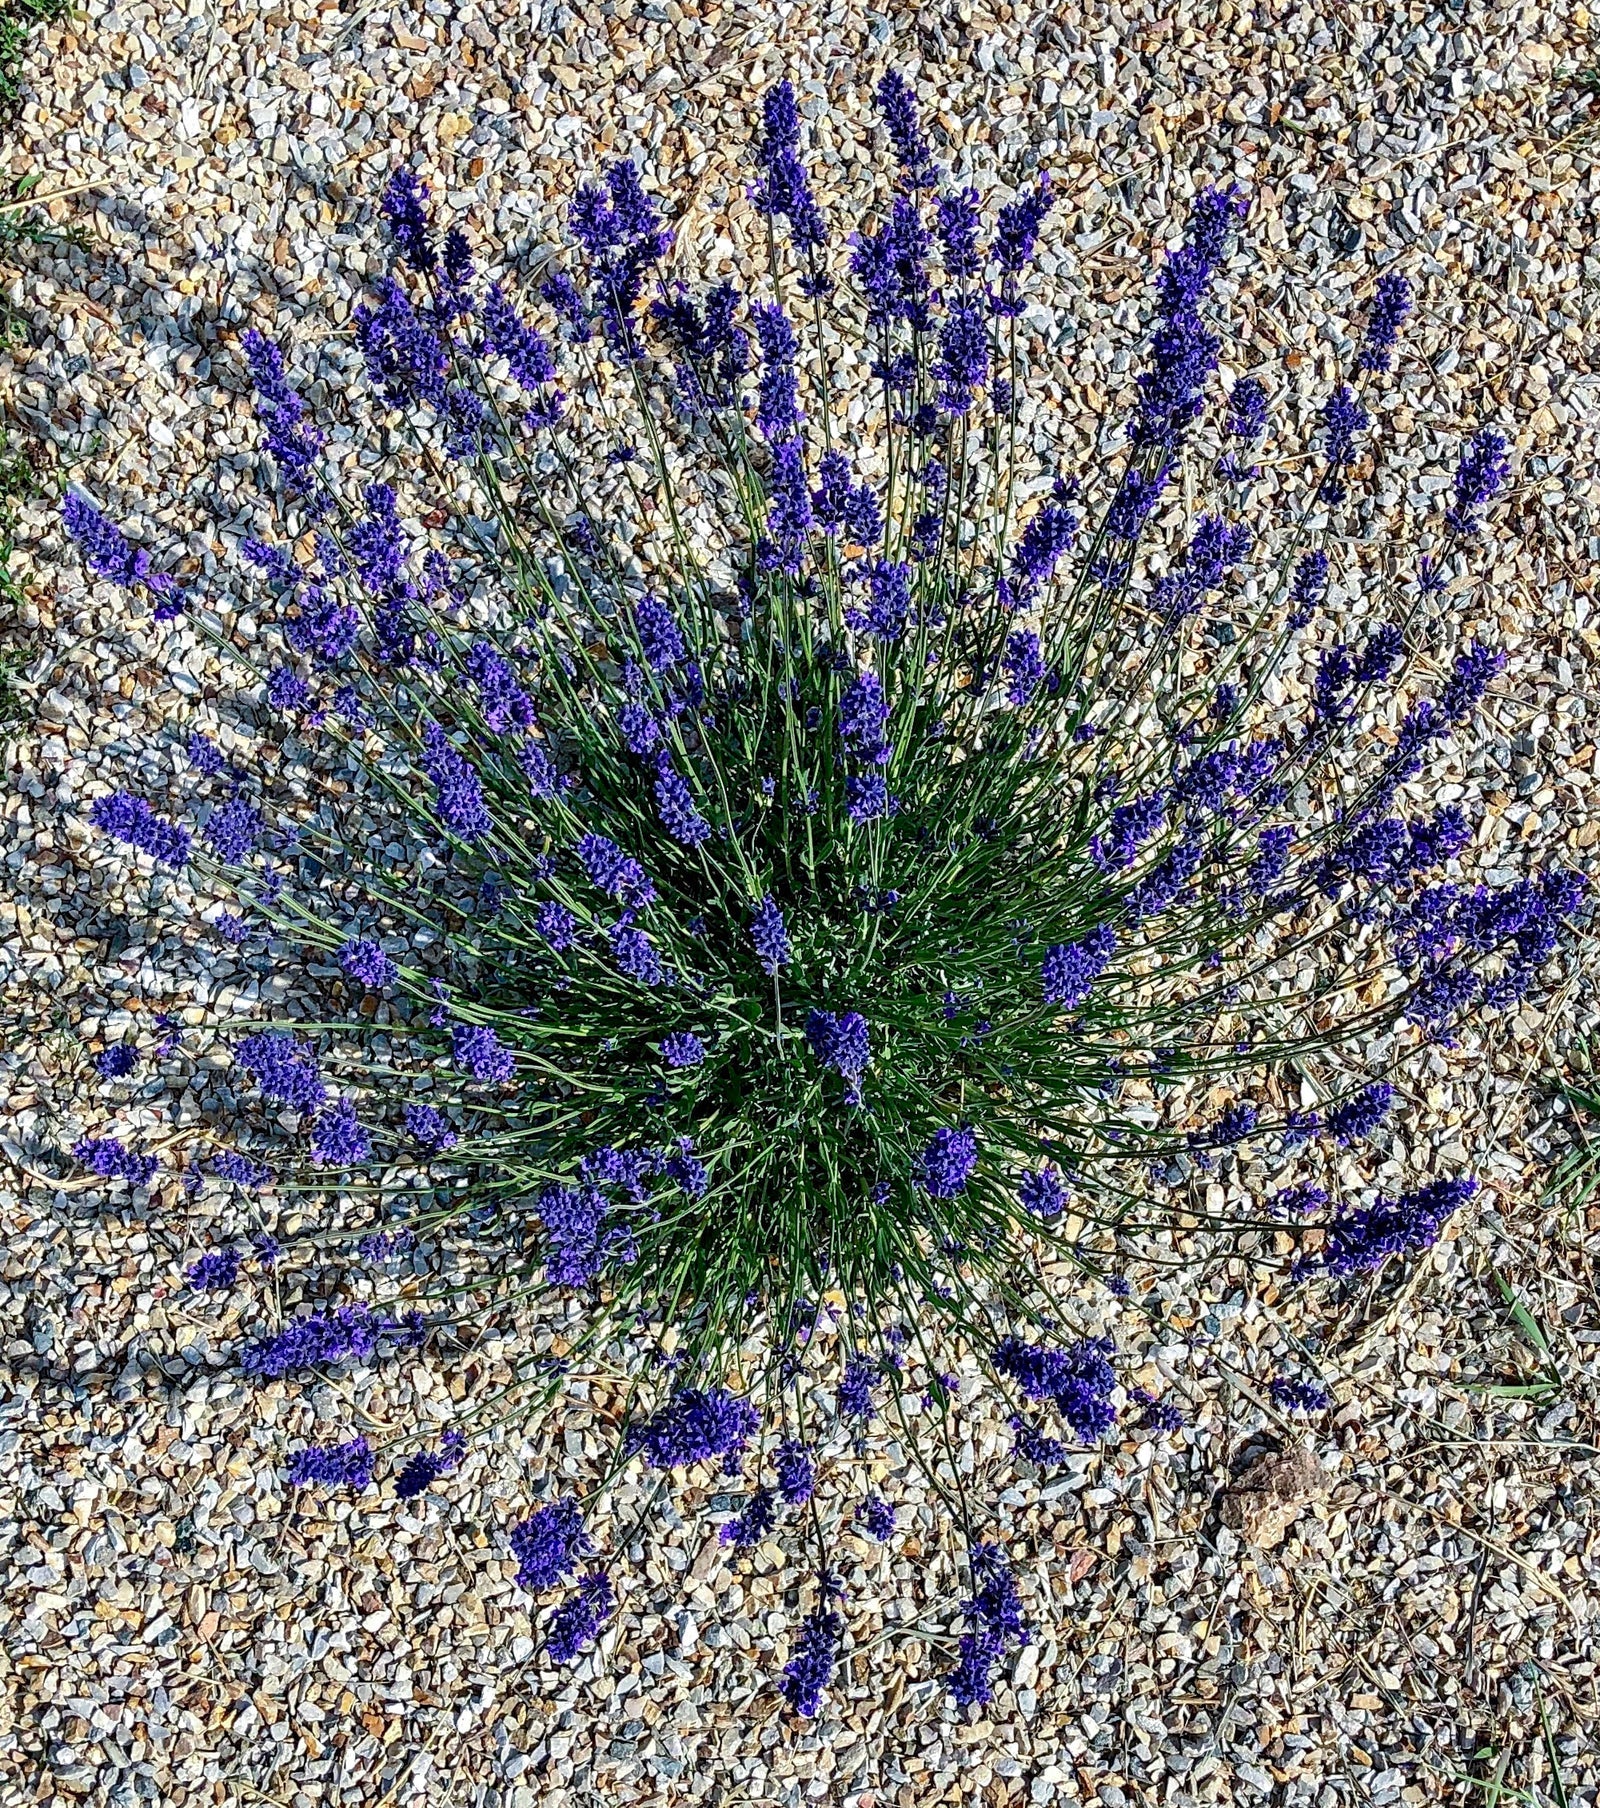 lavender plant surrounded by rocks